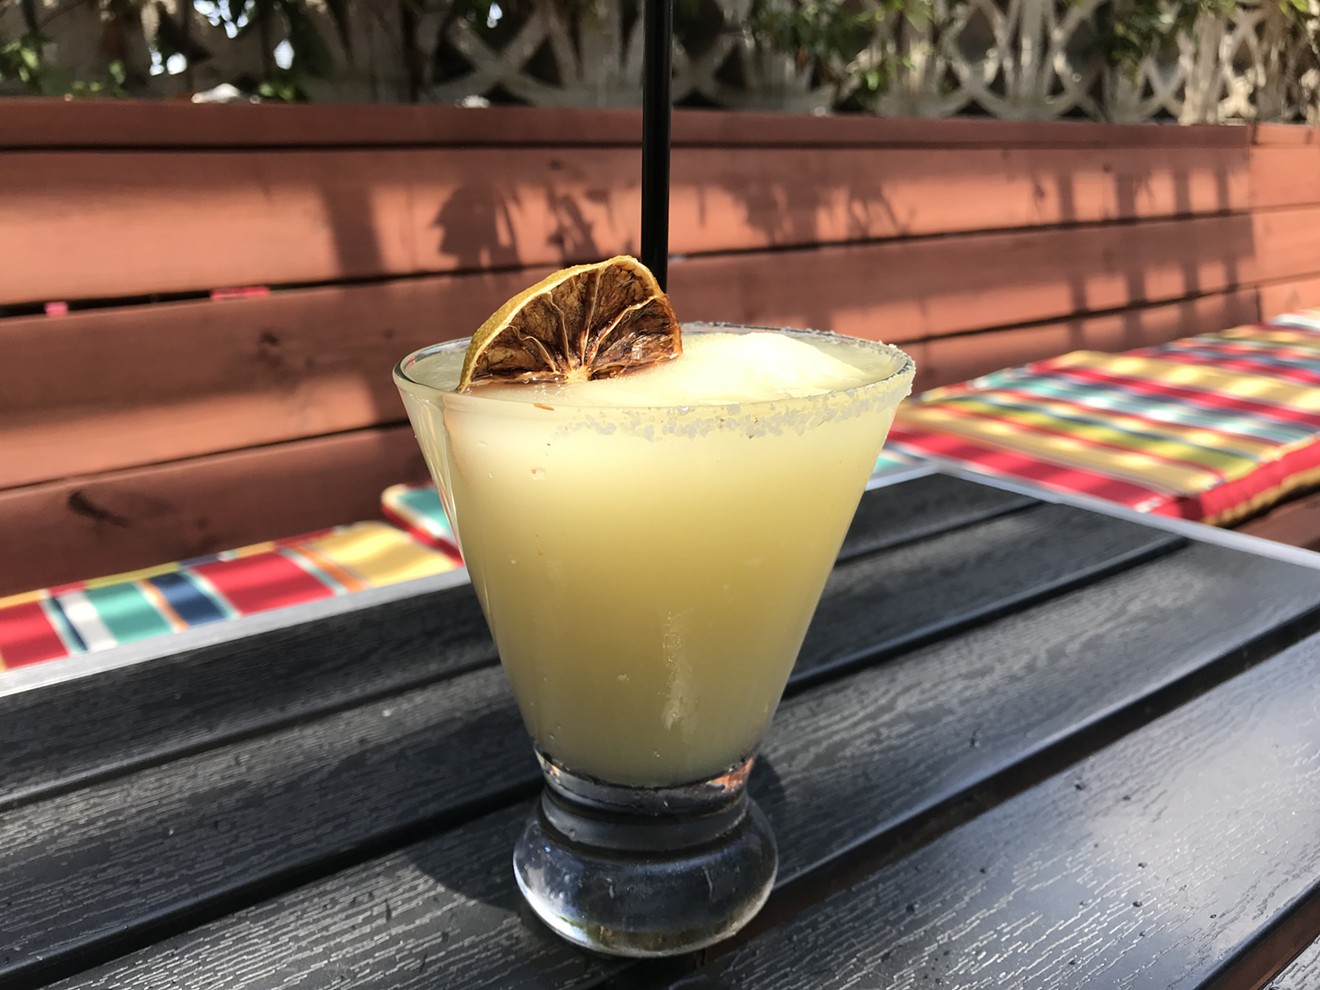 This margarita will only cost you 50 cents one night a month.